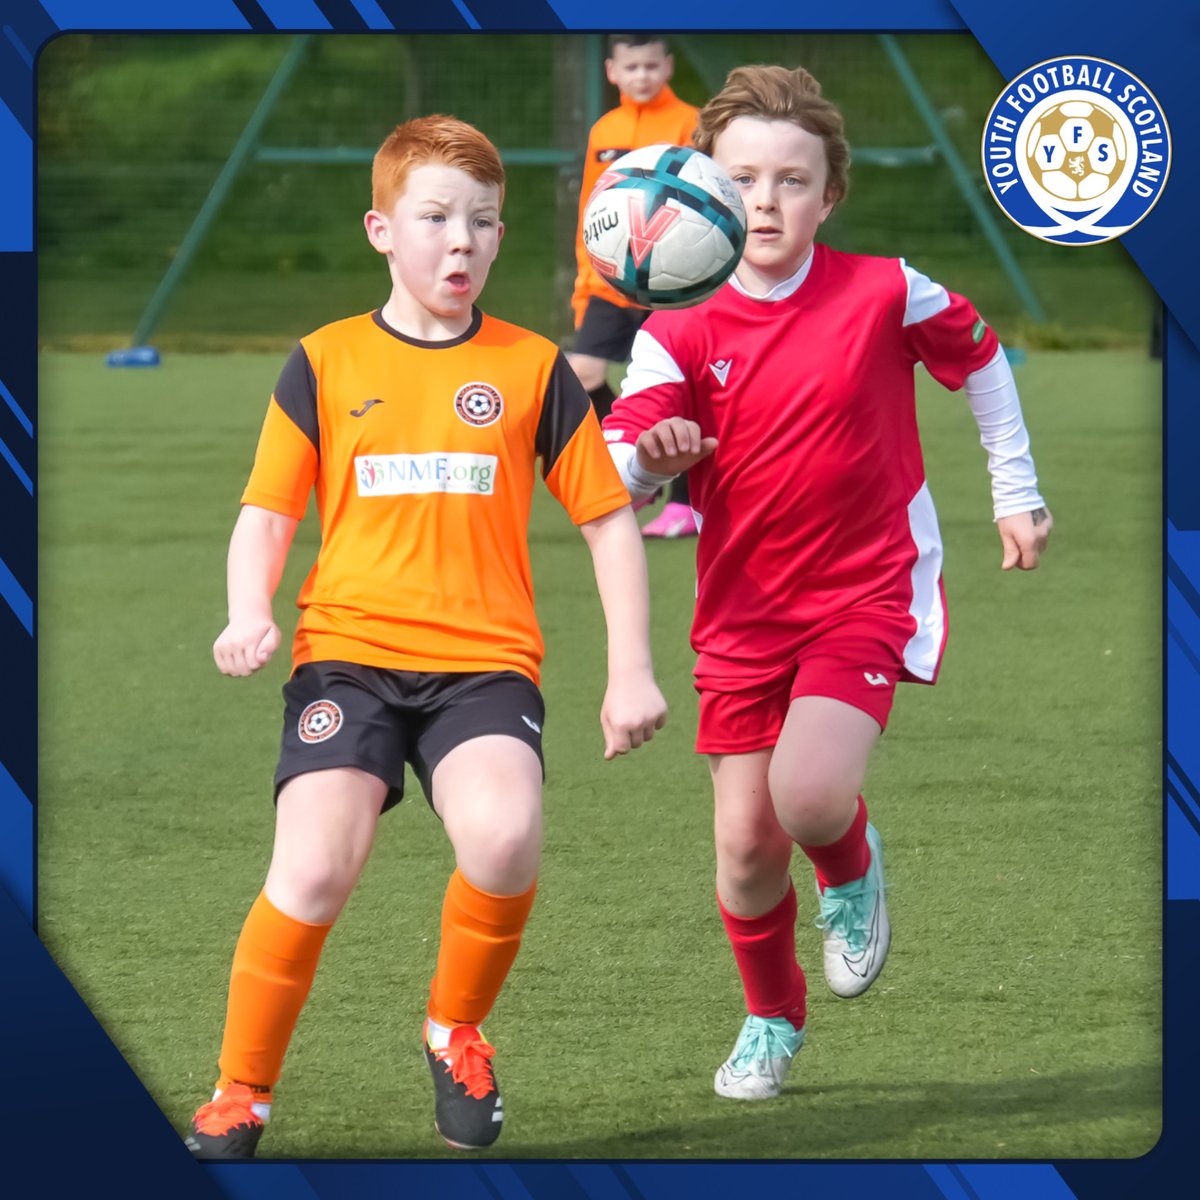 𝗣𝗛𝗢𝗧𝗢 𝗚𝗔𝗟𝗟𝗘𝗥𝗬 📸 Photo gallery, courtesy of 𝗥𝗮𝗰𝗵𝗮𝗲𝗹 𝗕𝘂𝗰𝗵𝗮𝗻𝗮𝗻 from the recent Glasgow & District YFL 2014s section at Glasgow Green. ➡️ View gallery: yfsphotos.co.uk/f688128327